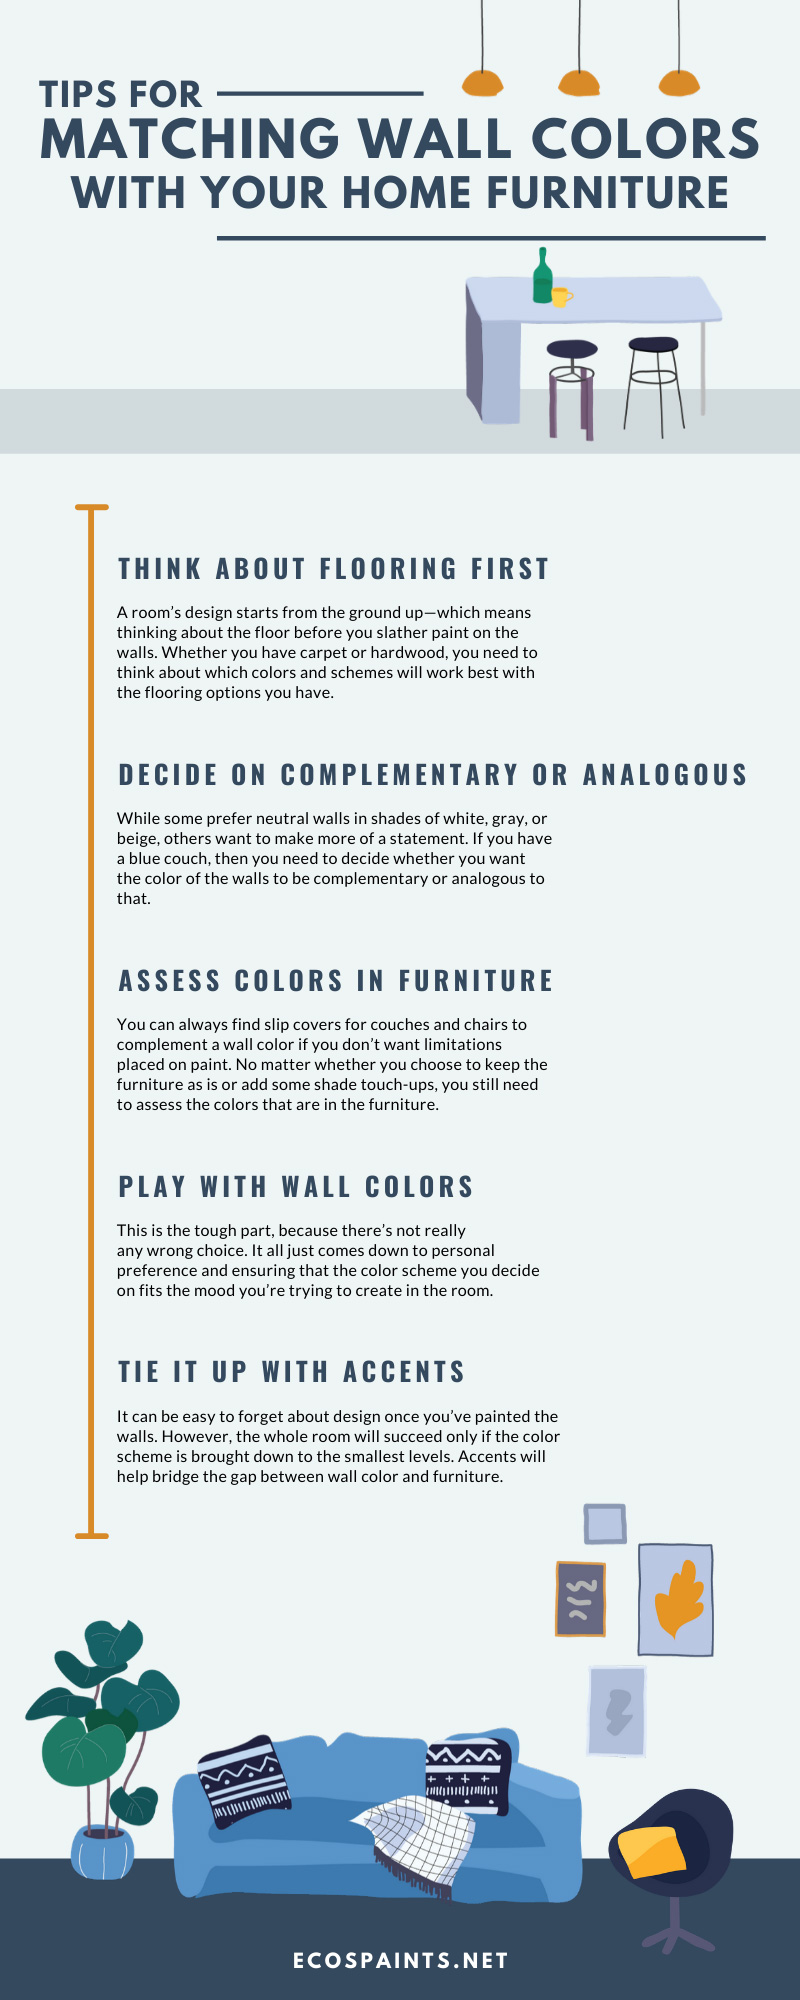 Tips for Matching Wall Colors With Your Home Furniture infographic